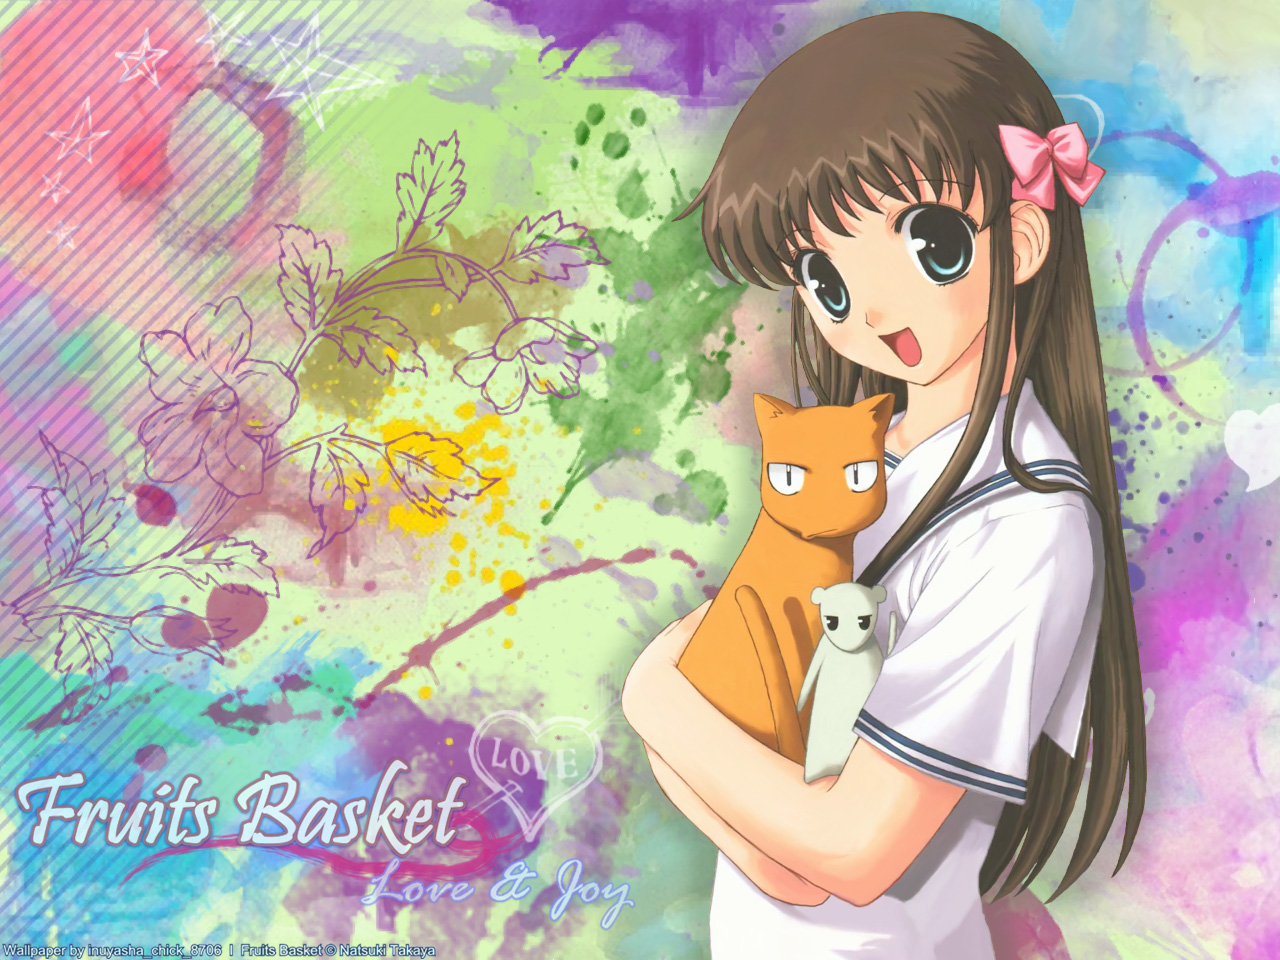 I Finally Watched the Old Fruits Basket | Review | Takuto's Anime Cafe